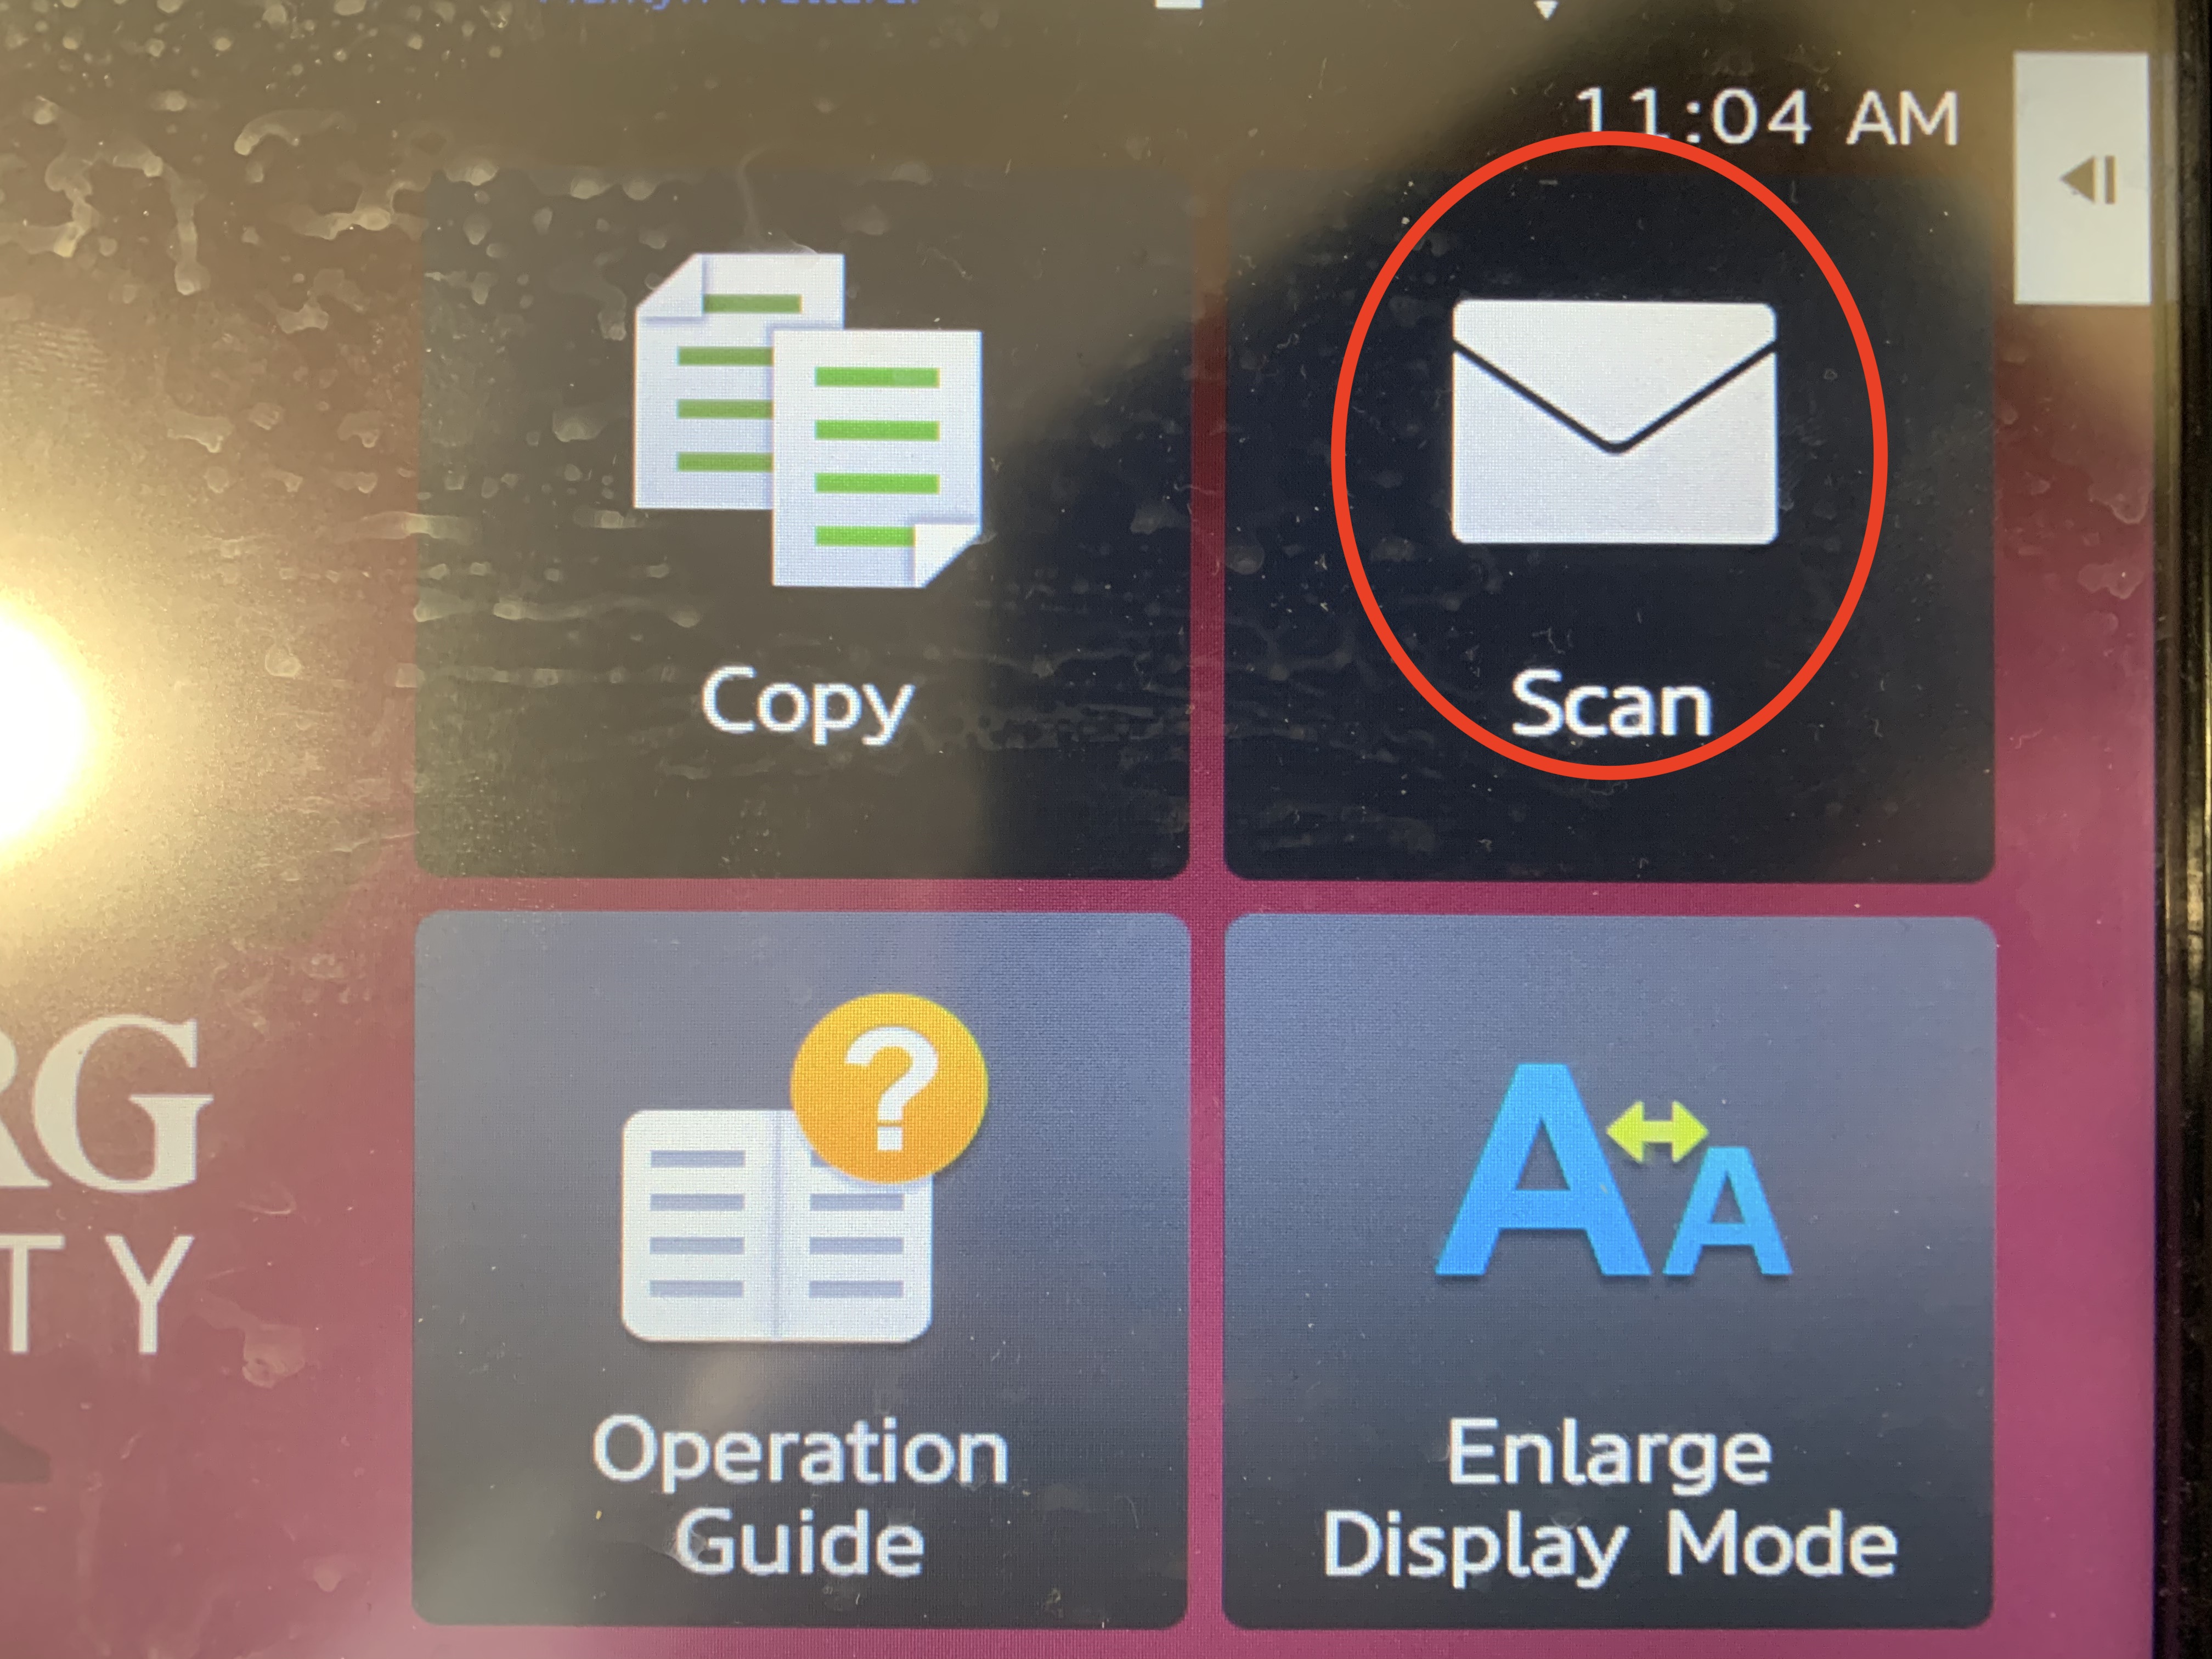 Shows four possible options: copy, scan, operation guide, enlarge display mode